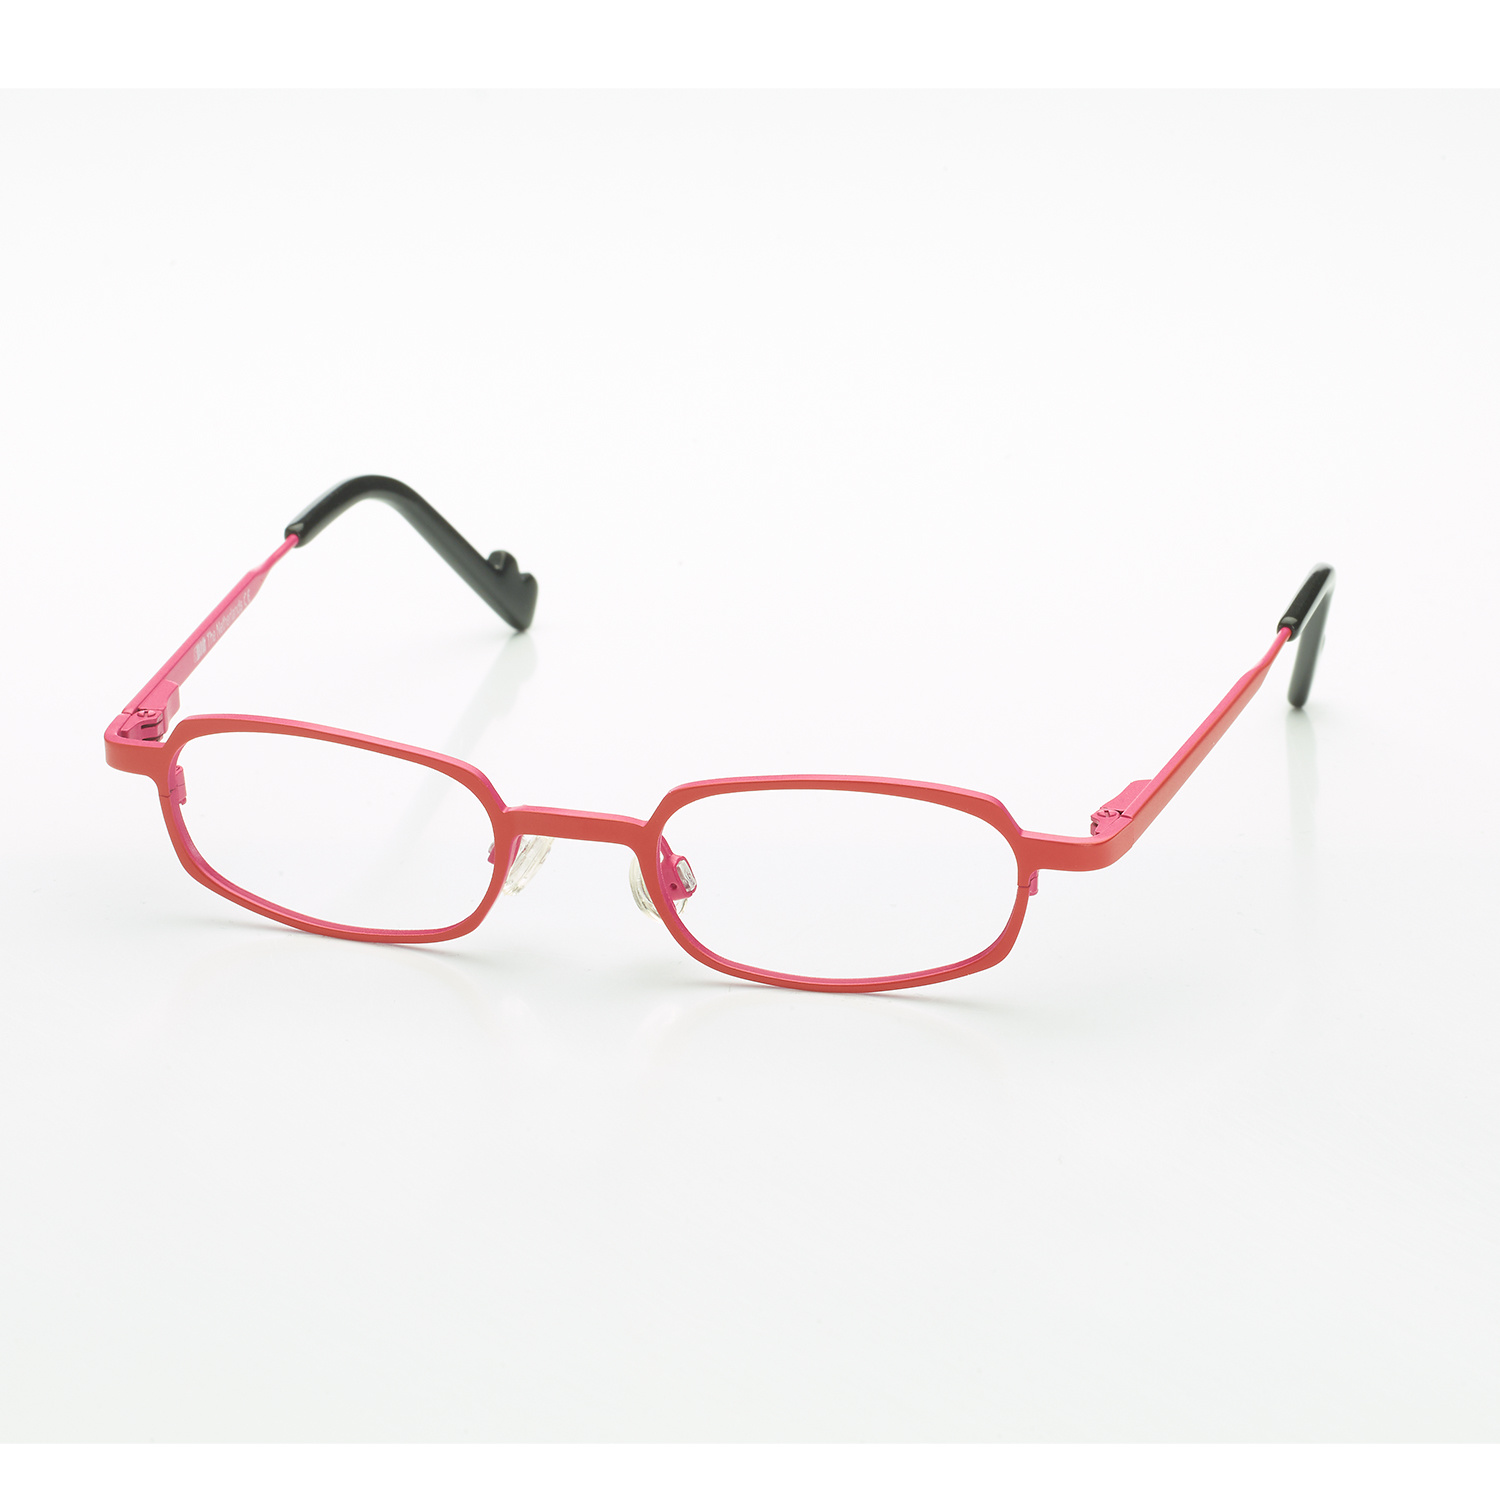 BBIG 034 - Red/Pink - BBIG bv